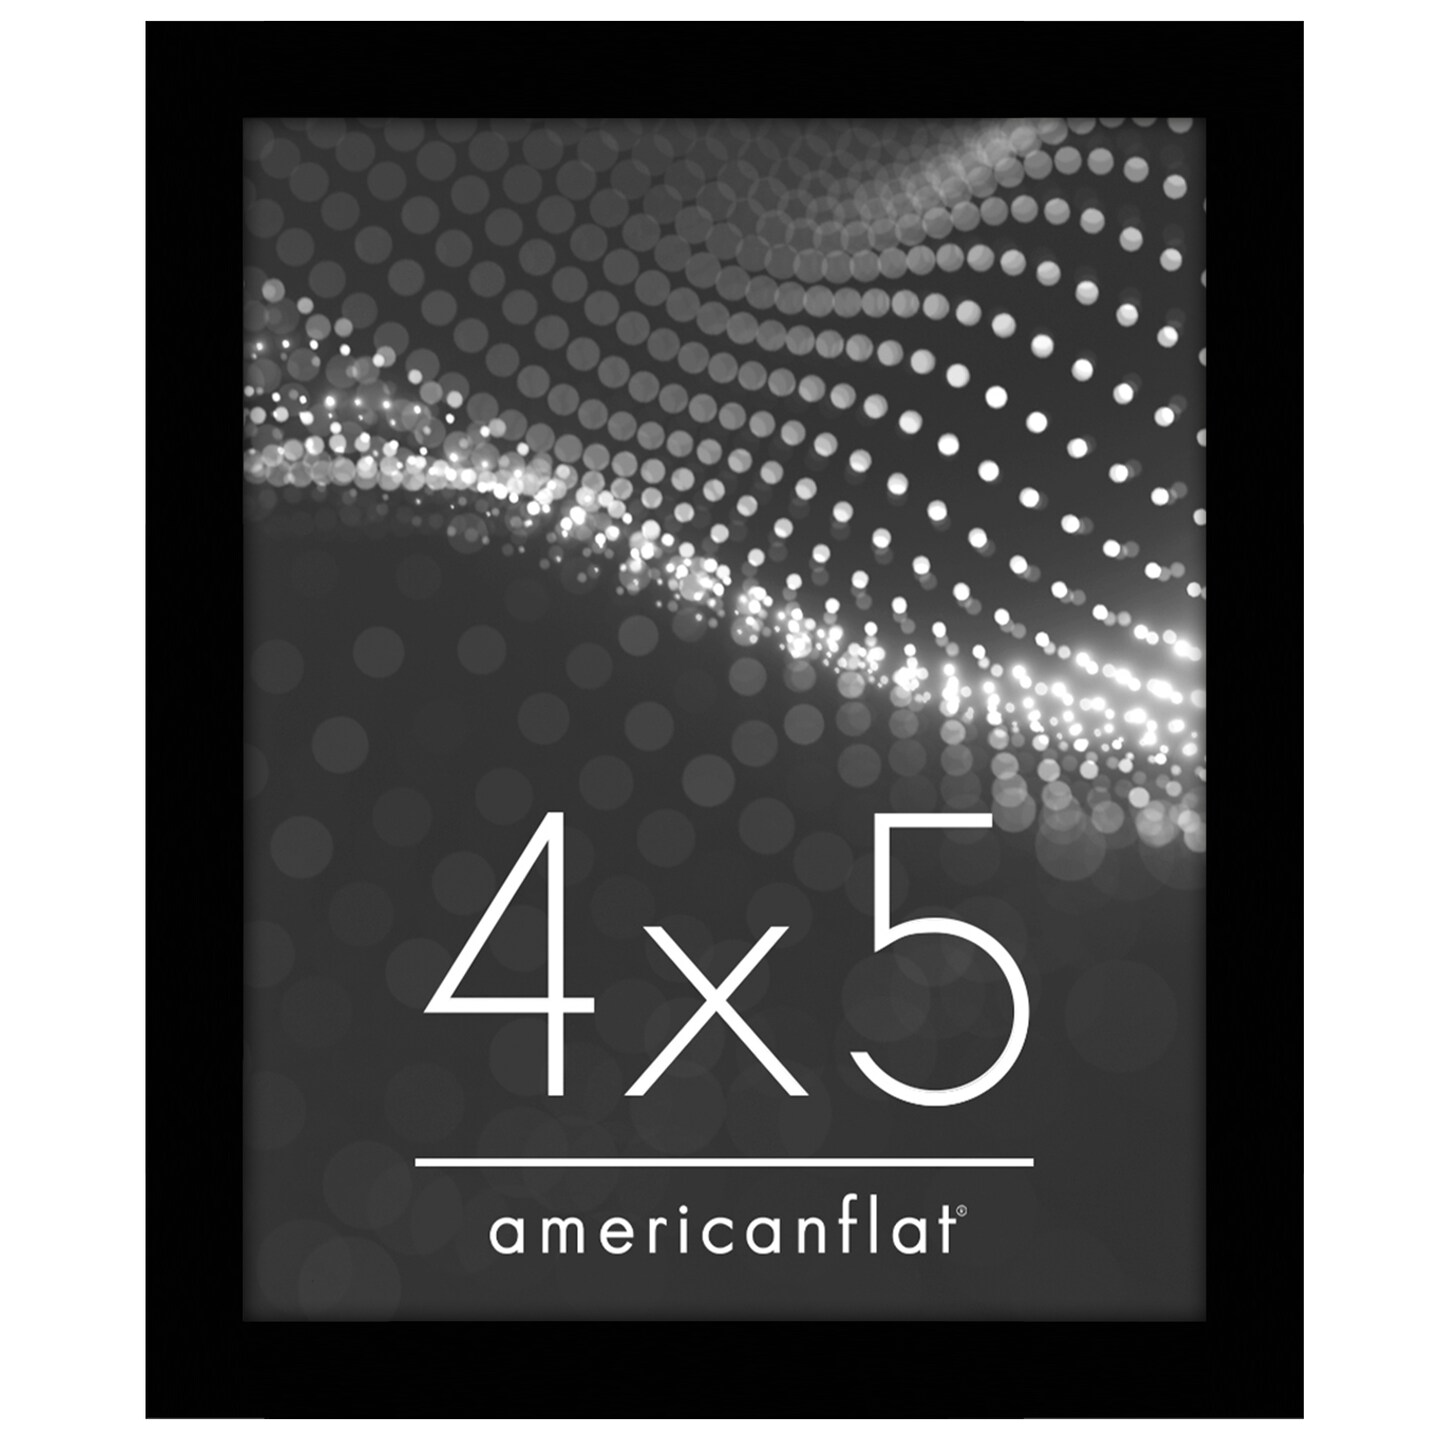 Americanflat Picture Frame - Modern Design, Shatter-Resistant Glass, Dual Sawtooth Hangers, Ideal for Home and Office Decor